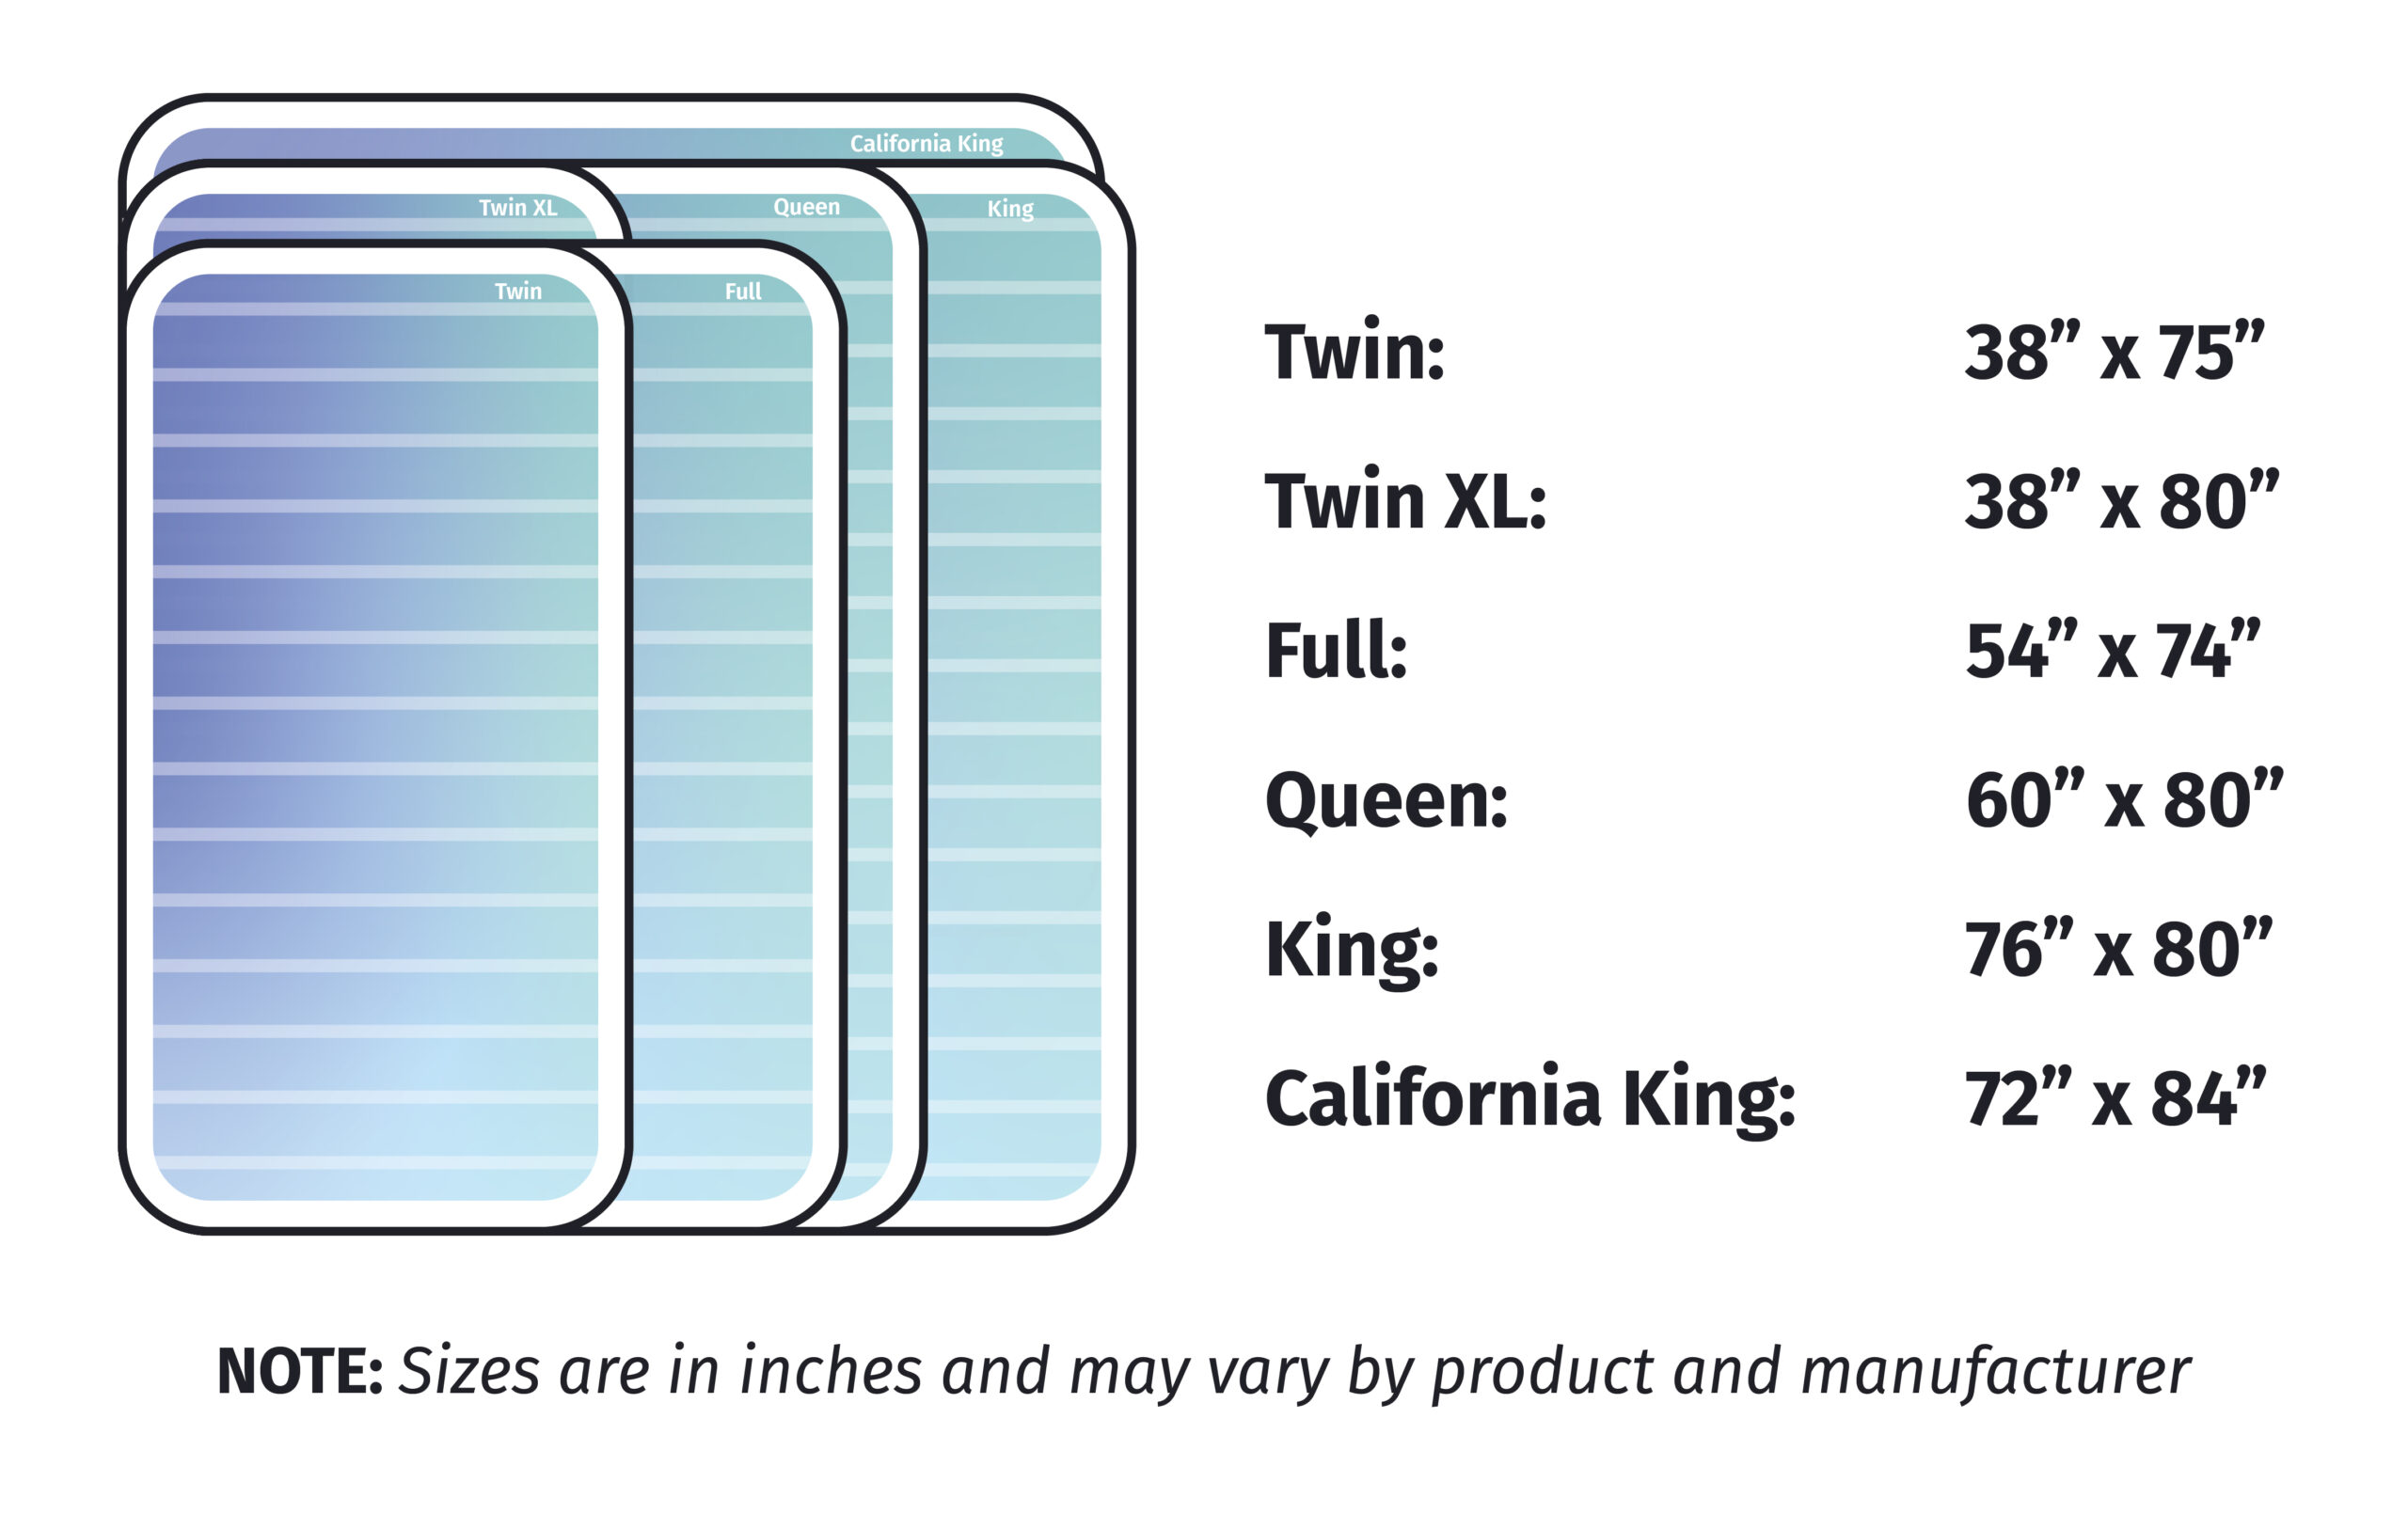 Mattress Sizes and Dimensions Guide   Mattress Clarity